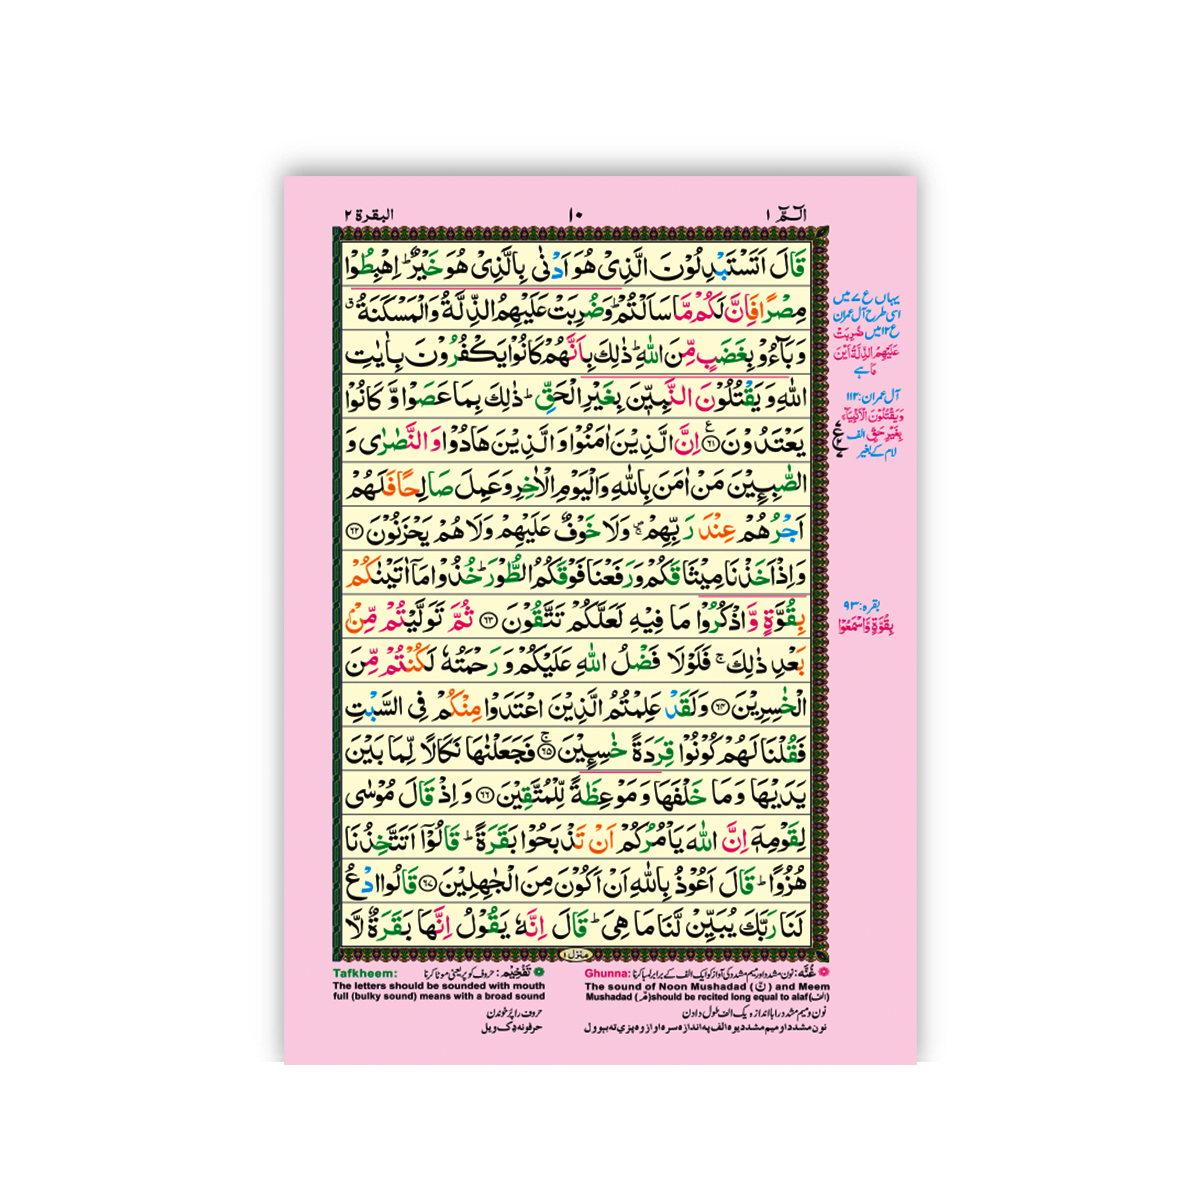 [876/4Special] Al-Quran-Ul-Kareem In 16 Lines With Tajweed Rules (Without Translation) - Gift Edition